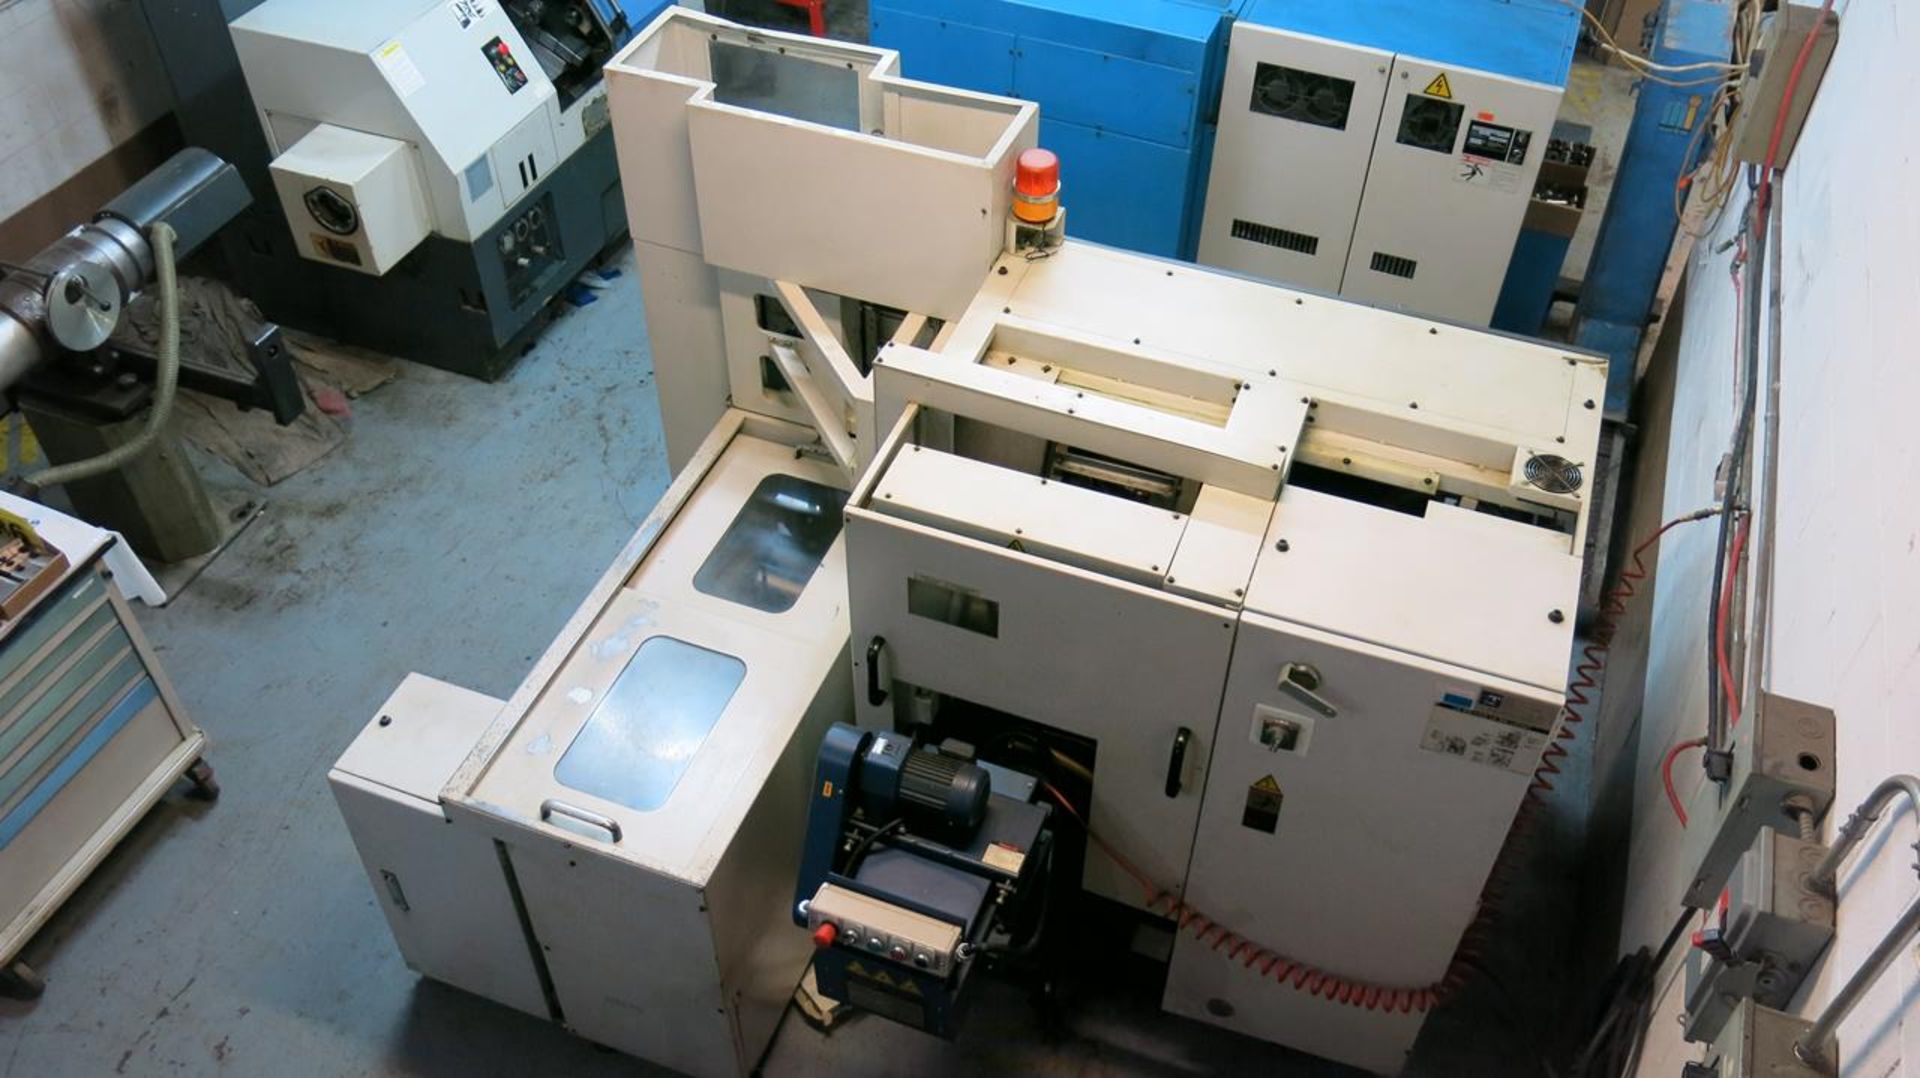 2012, TONGTAI MACHINE CO., HS-22, CNC PRECISION LATHE, 15 HP SPINDLE, 6000 RPM SPINDLE, 6" DIA 3 JAW - Image 4 of 9